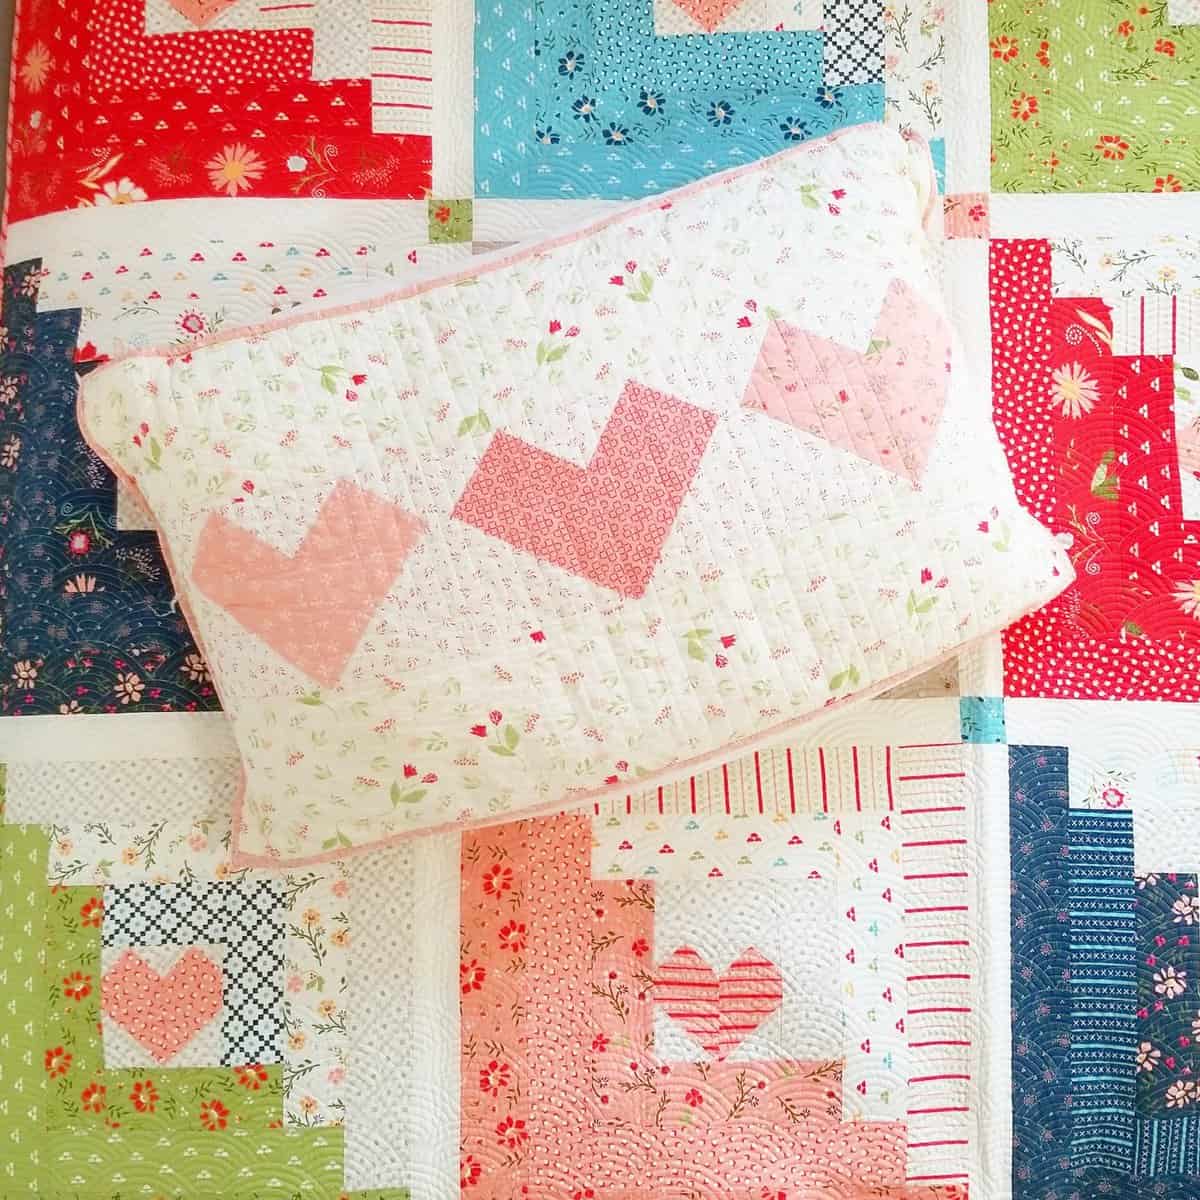 Easy Heart Quilt Patterns & Projects featured by Top US Quilt Blog, A Quilting Life